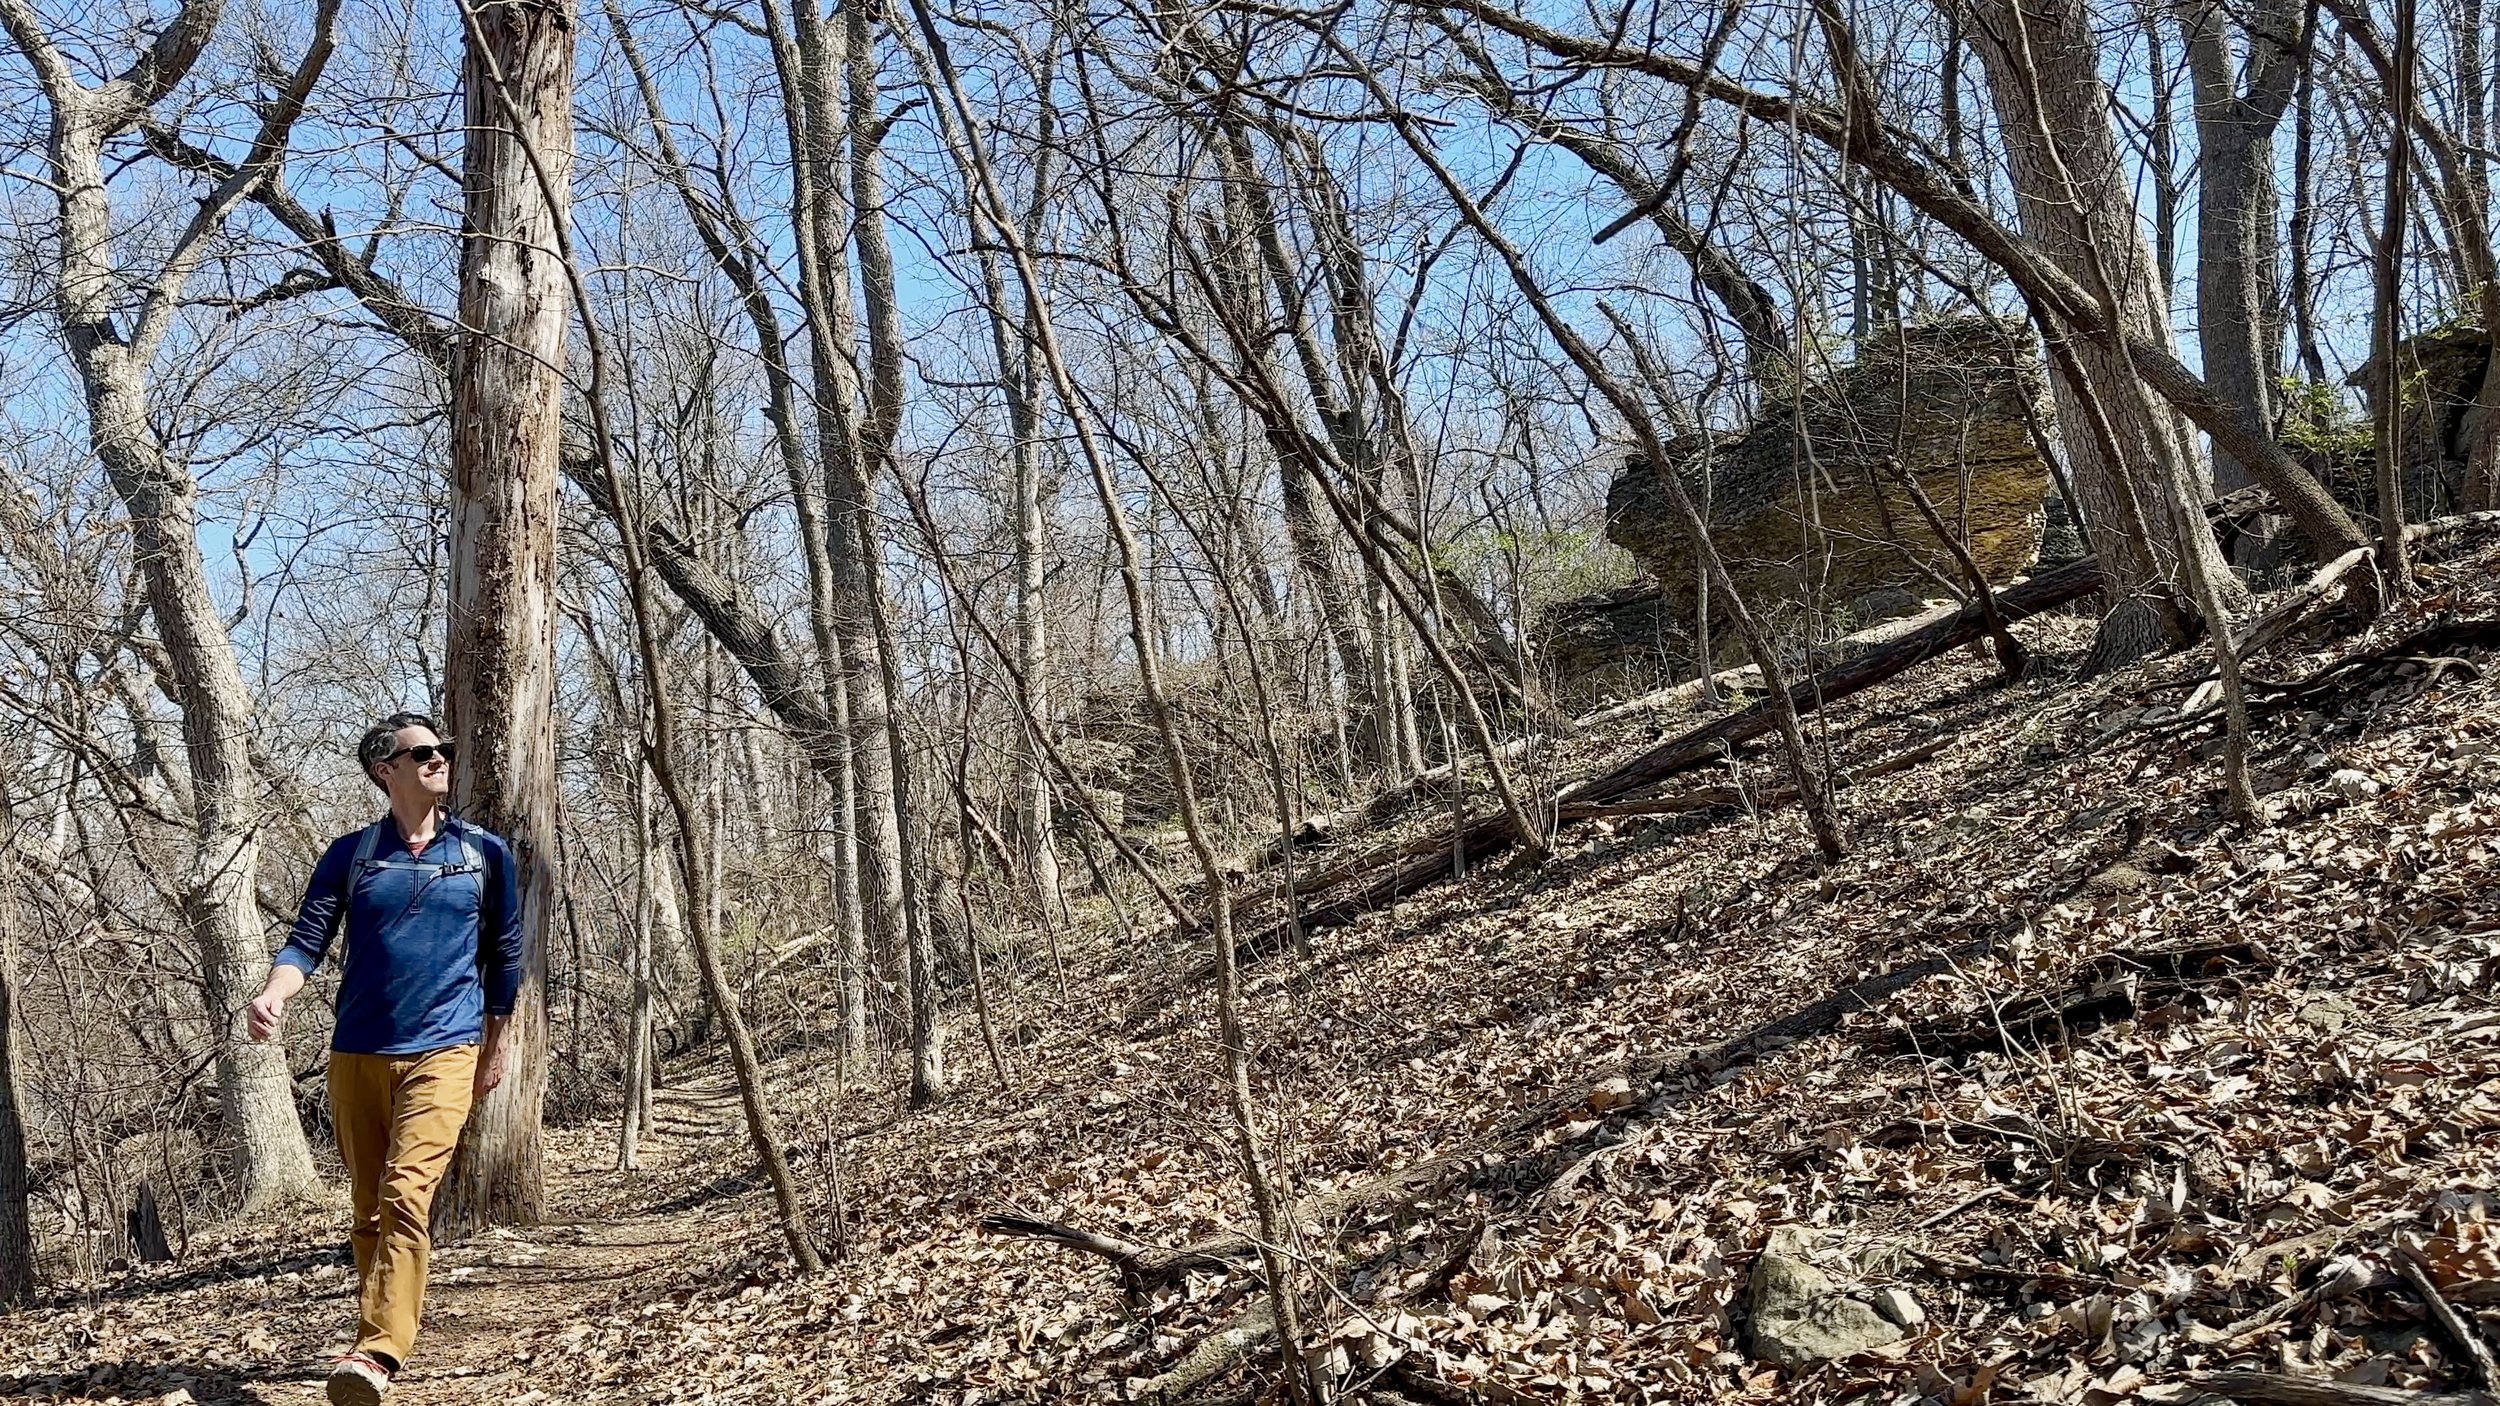 View from Lower Rock Ledges